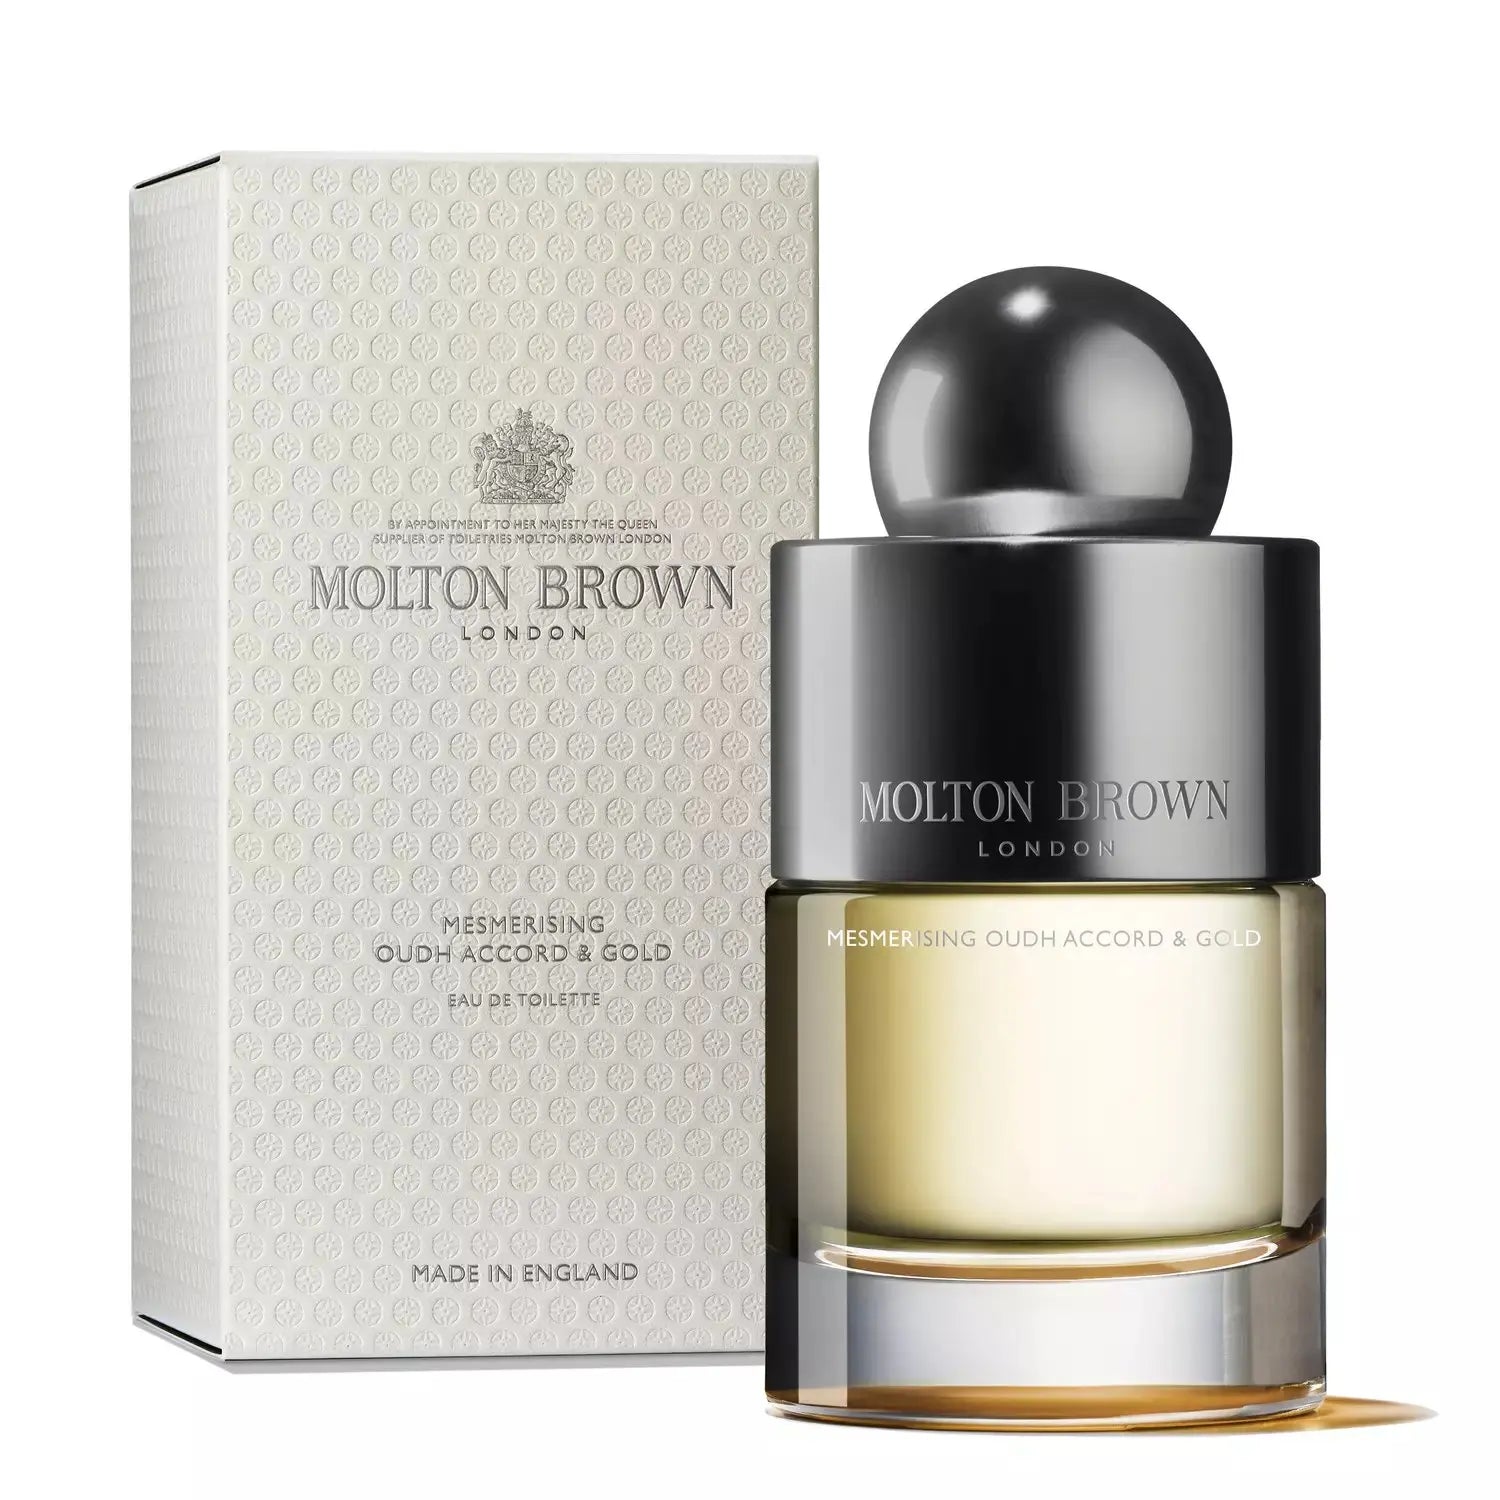 Molton Brown Mesmerizing Oudh Accord and Gold Eau de Toilette with packaging box